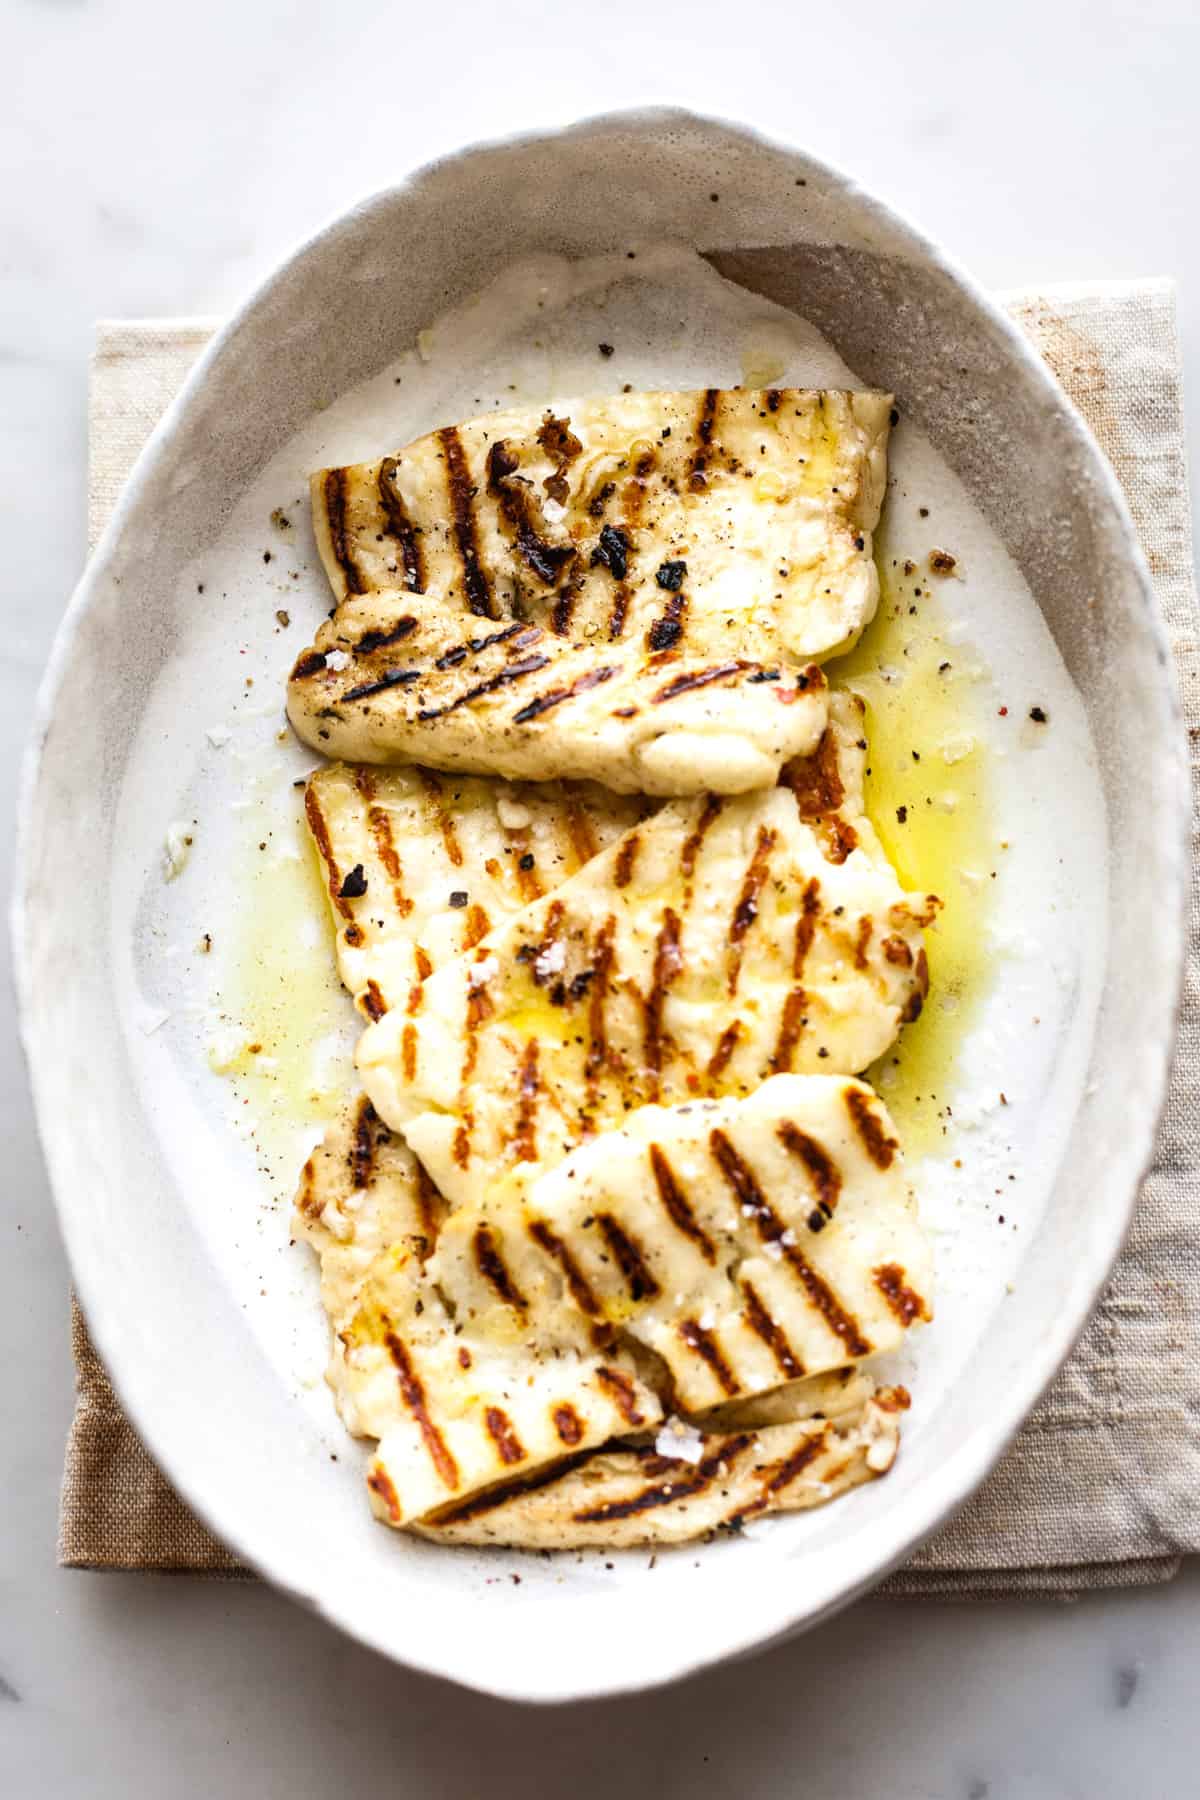 Grilled halloumi in a bowl with sea salt